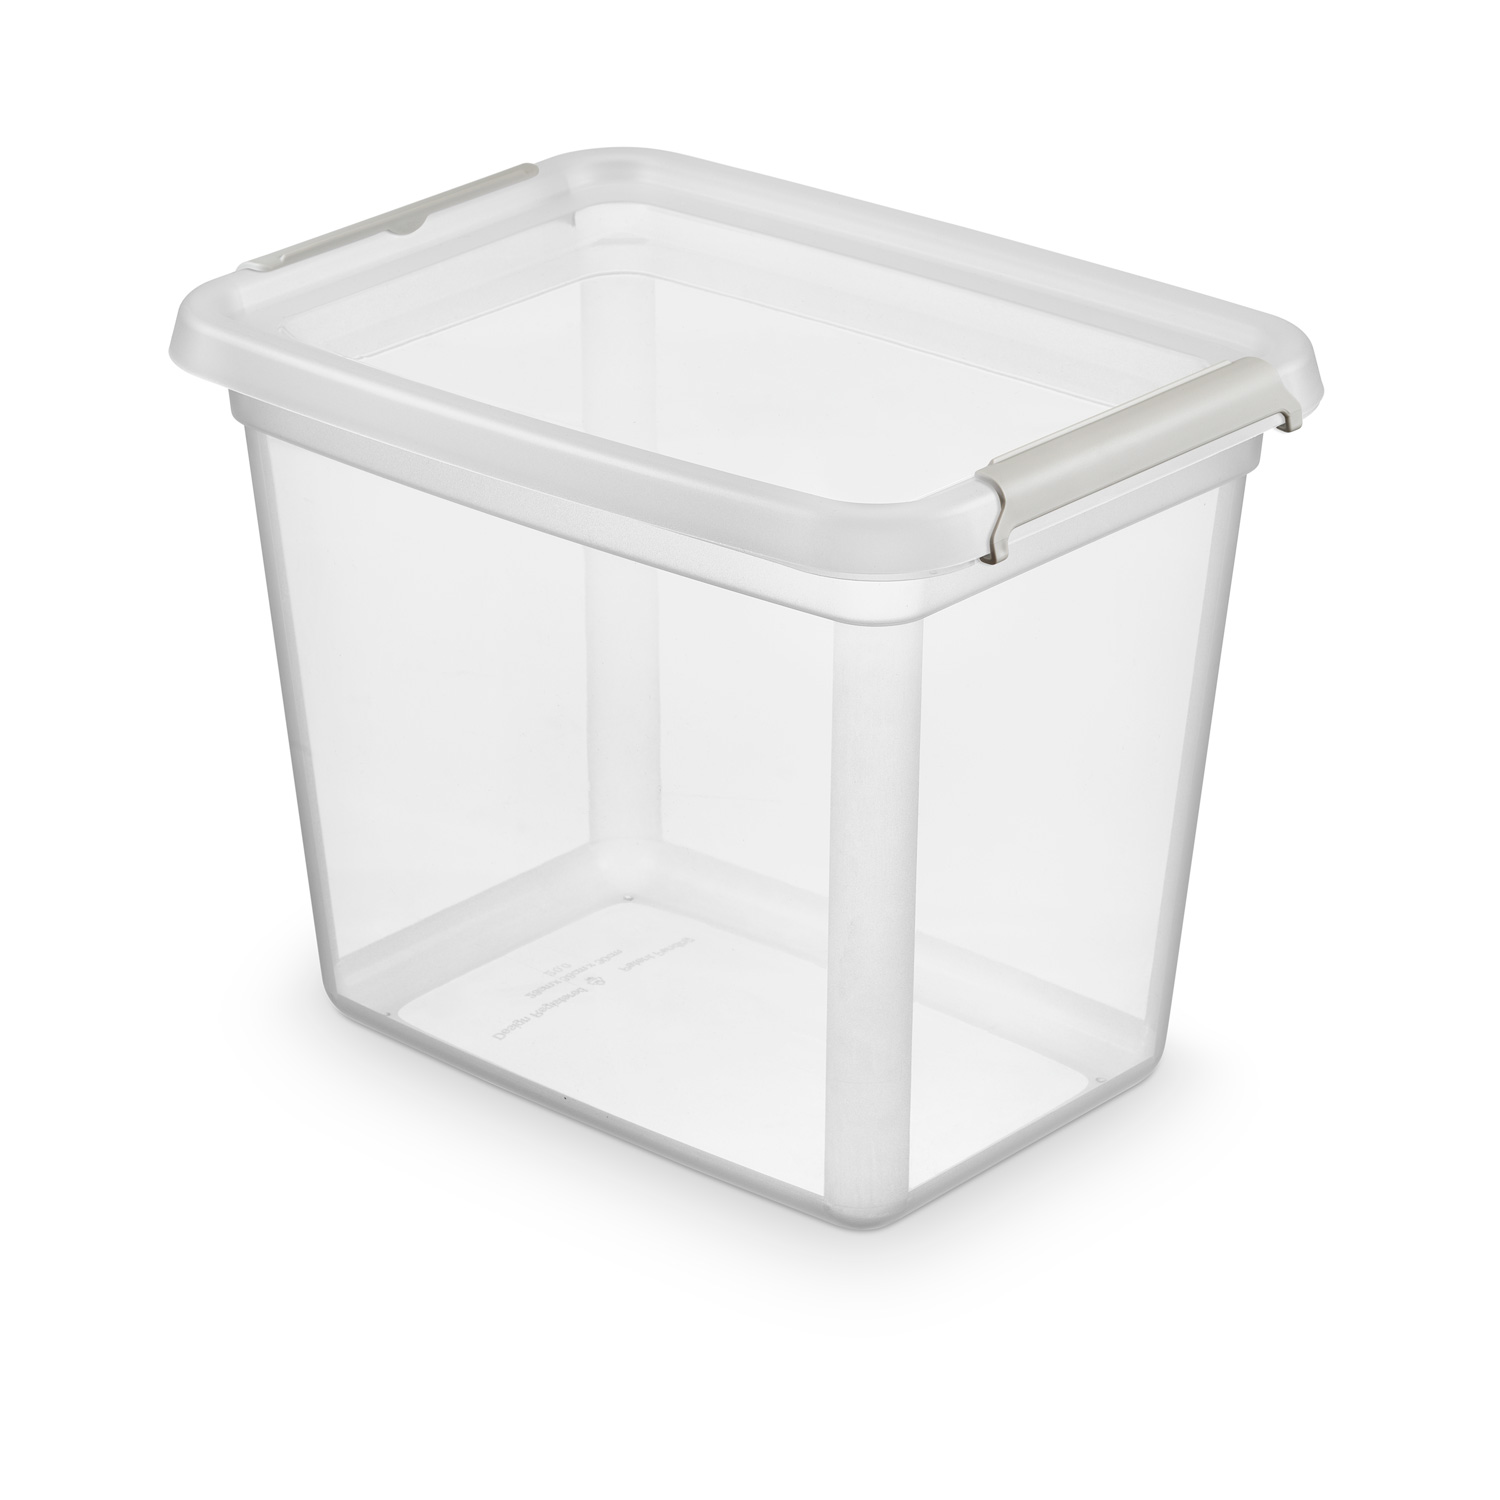 Basestore container with lid and clips, 38x28x30 cm, 20L